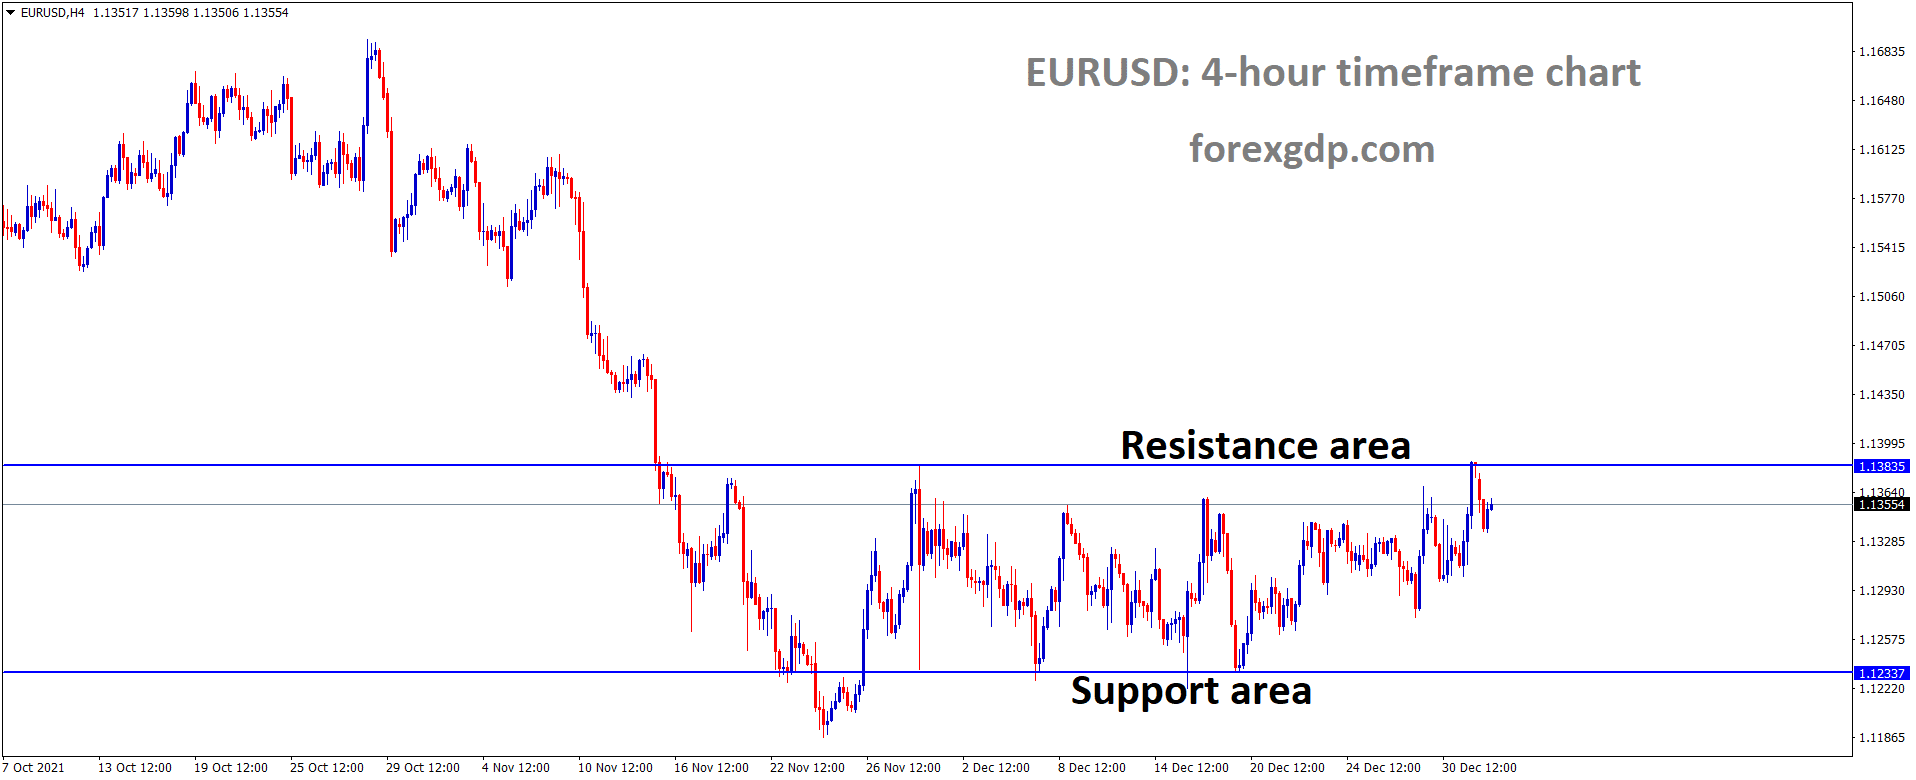 EURUSD is moving in the Box Pattern and the market has fallen from the resistance area of the Box Pattern